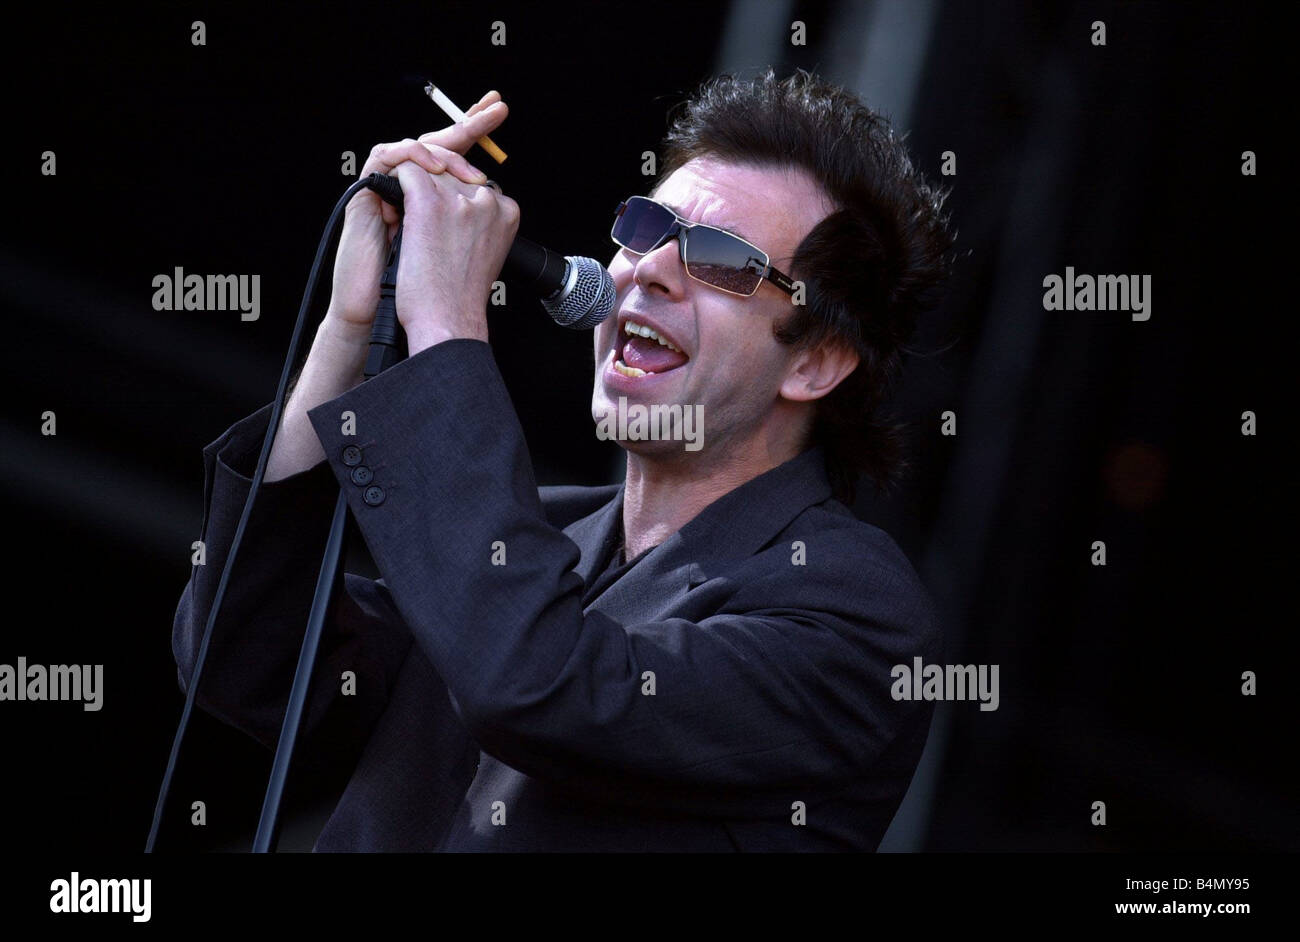 Ian McCulloch onstage at T In The Park July 2003 Echo And The Bunnymen pop singer Stock Photo